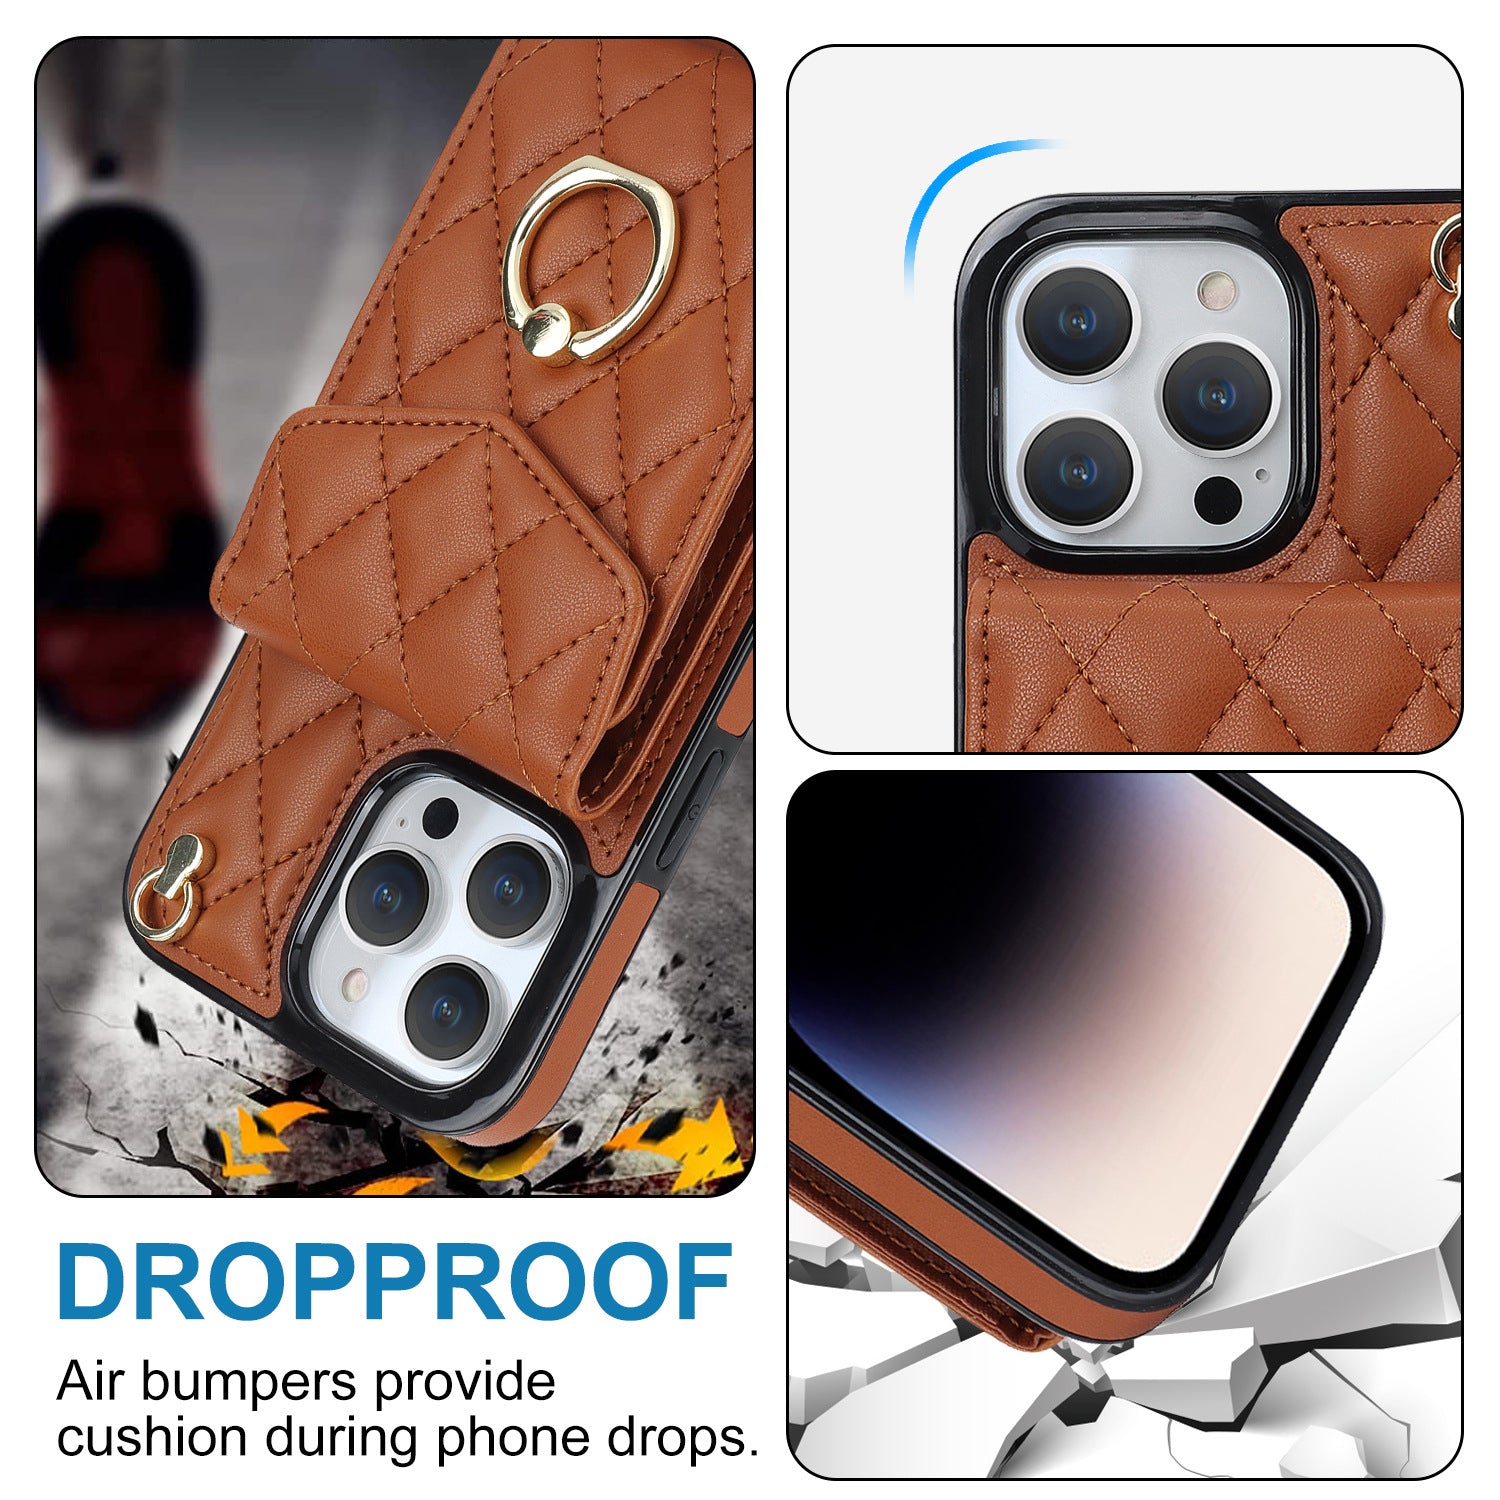 iPhone Crossbody Card Case: Show casting protection